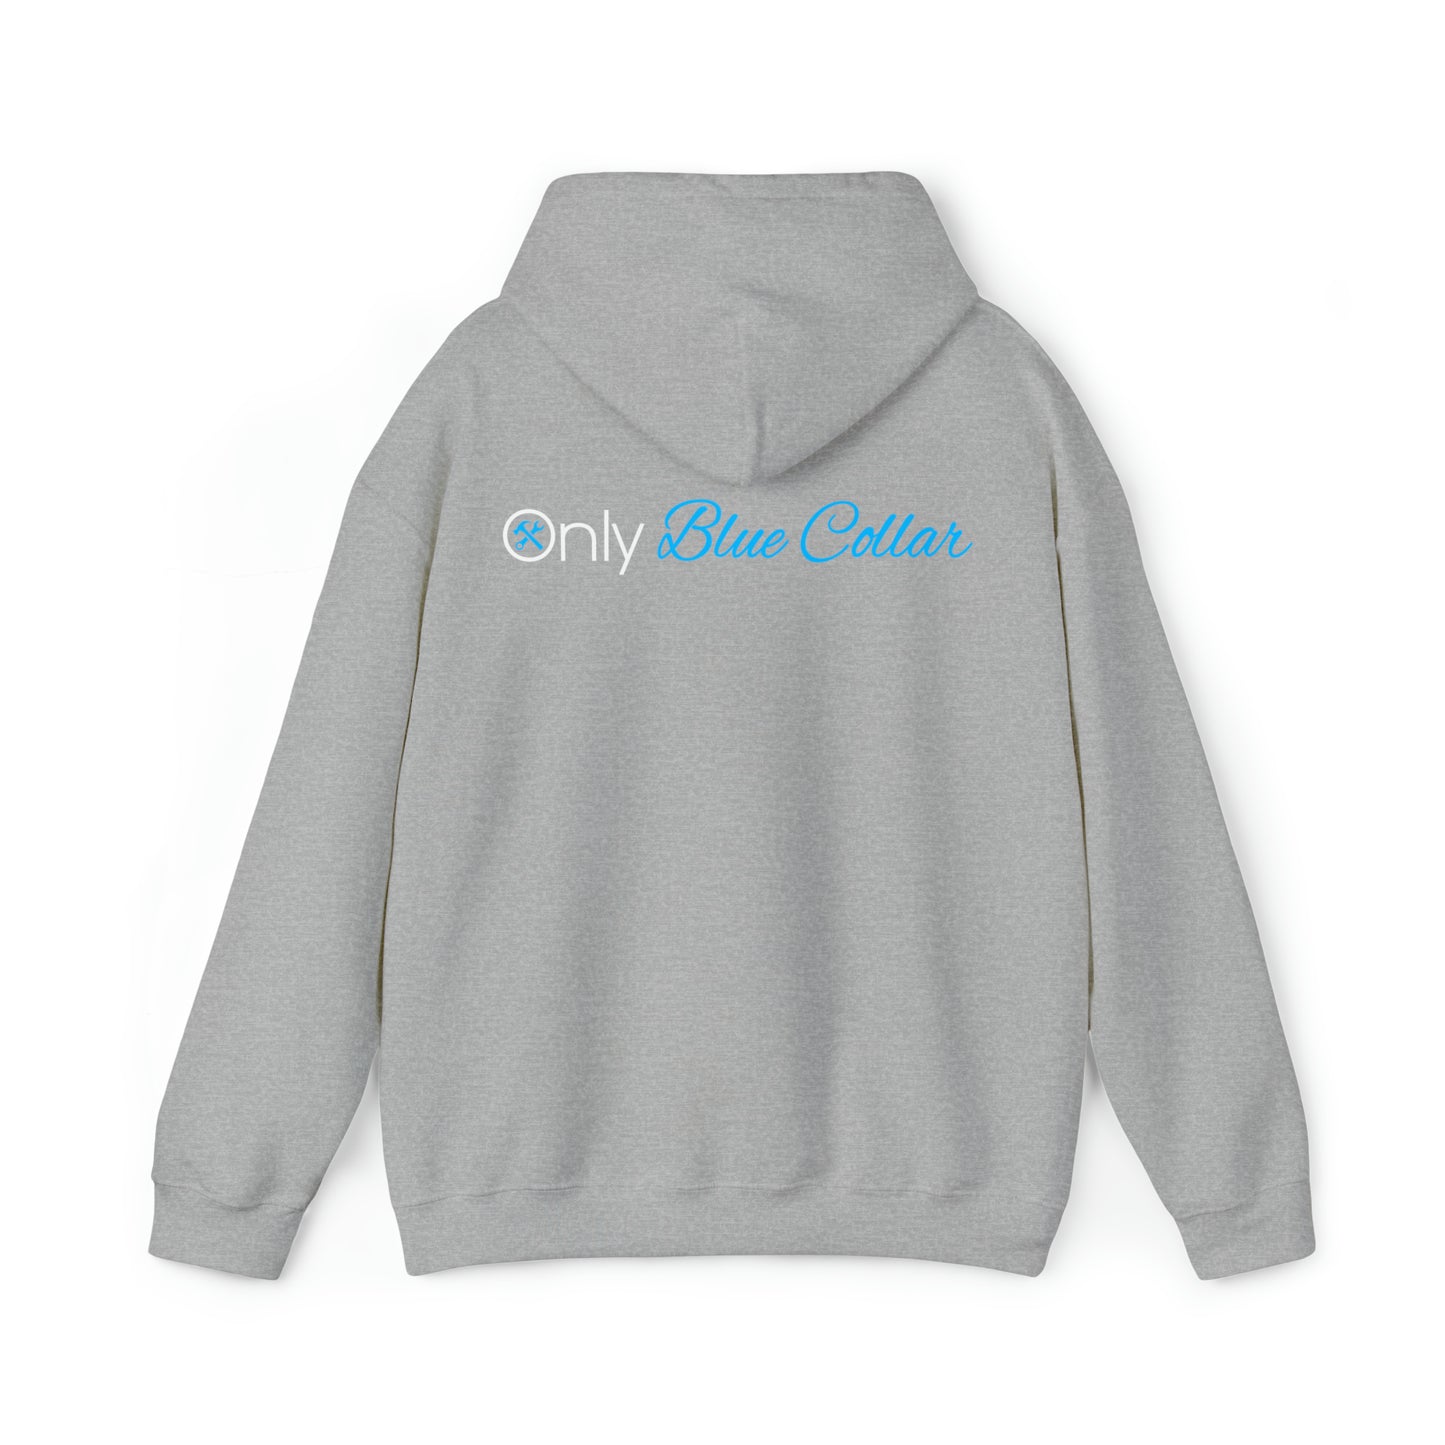 Only Blue Collar Hoodie